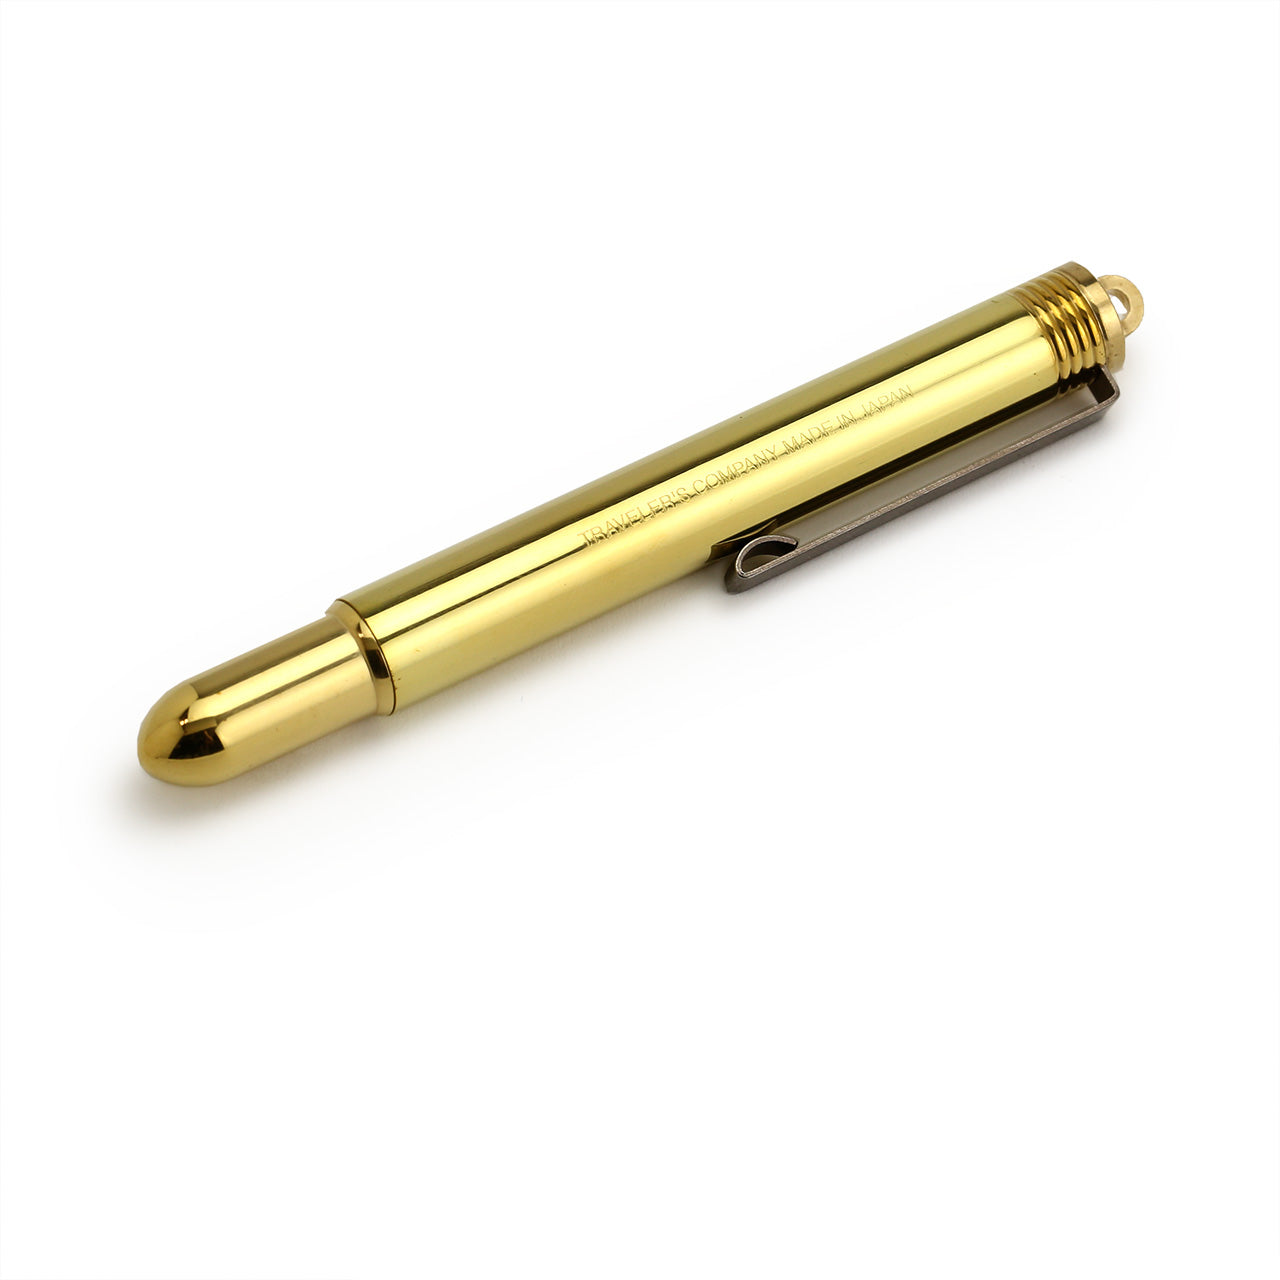 brass fountain pen fromTraveler's company Japan shows three-quarter side view fully posted